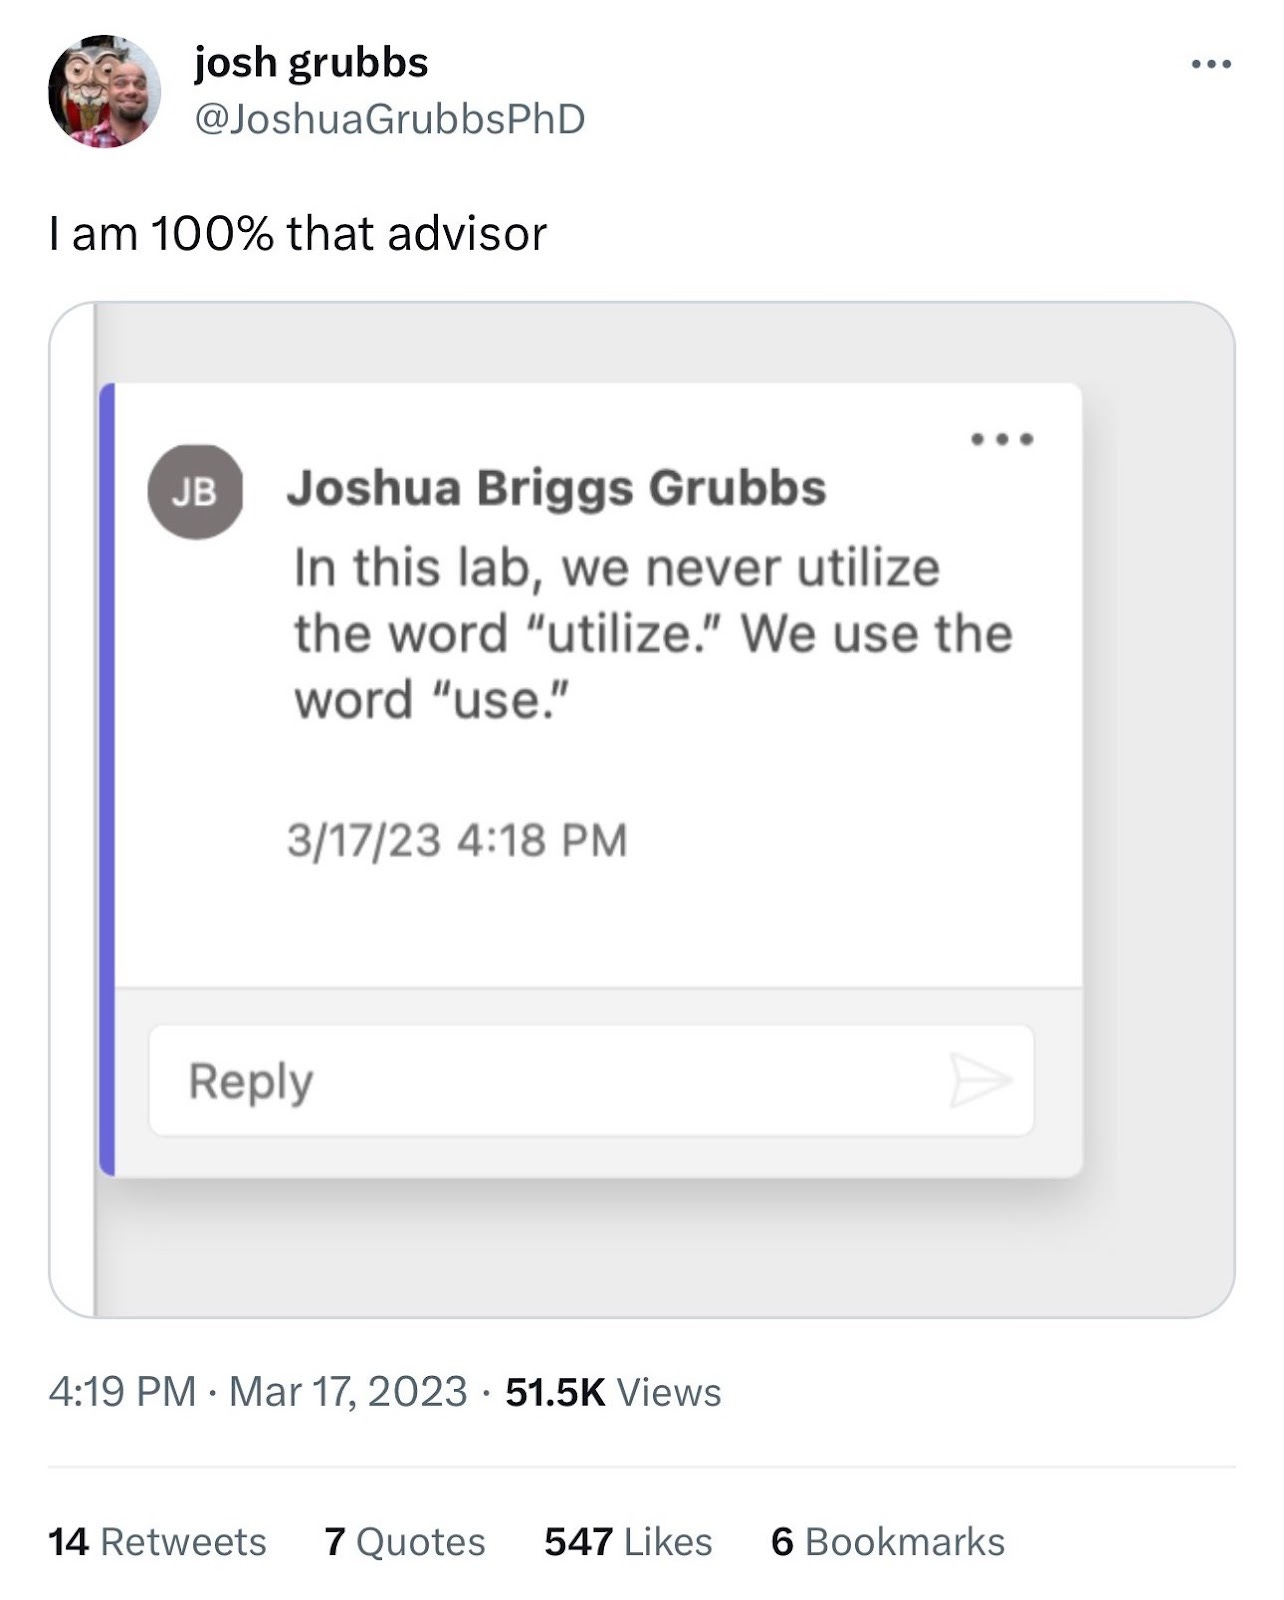 Screencap of a tweet. Text: "I am 100% that advisor." Includes an image of an in-line comment on a document, saying "In this lab, we never utilize the word 'utilize.' We use the word 'use.'"